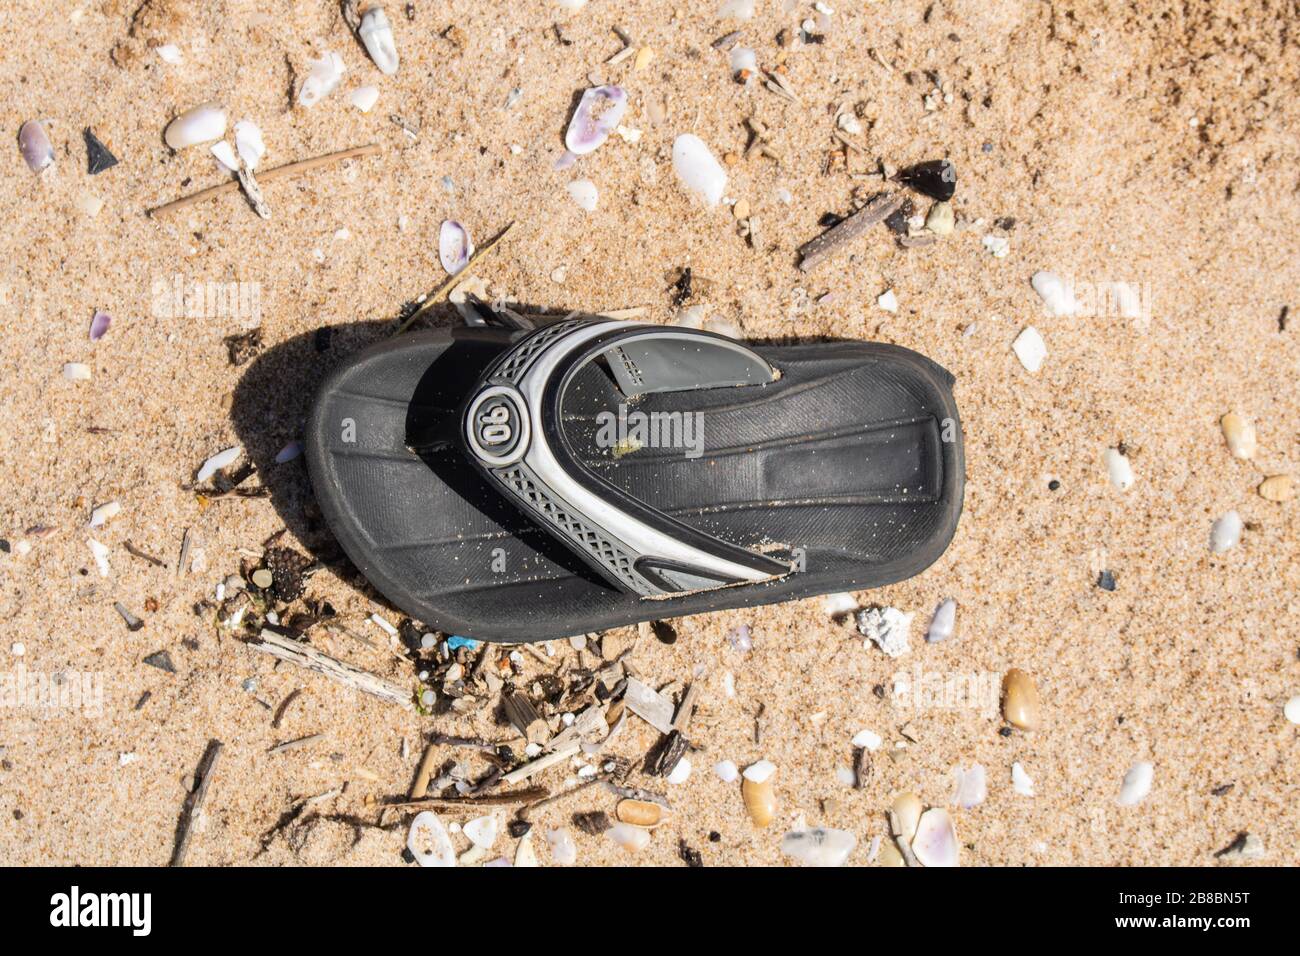 Beirut, Lebanon. 21 March 2020. A sandal discarded on a polluted beach ...